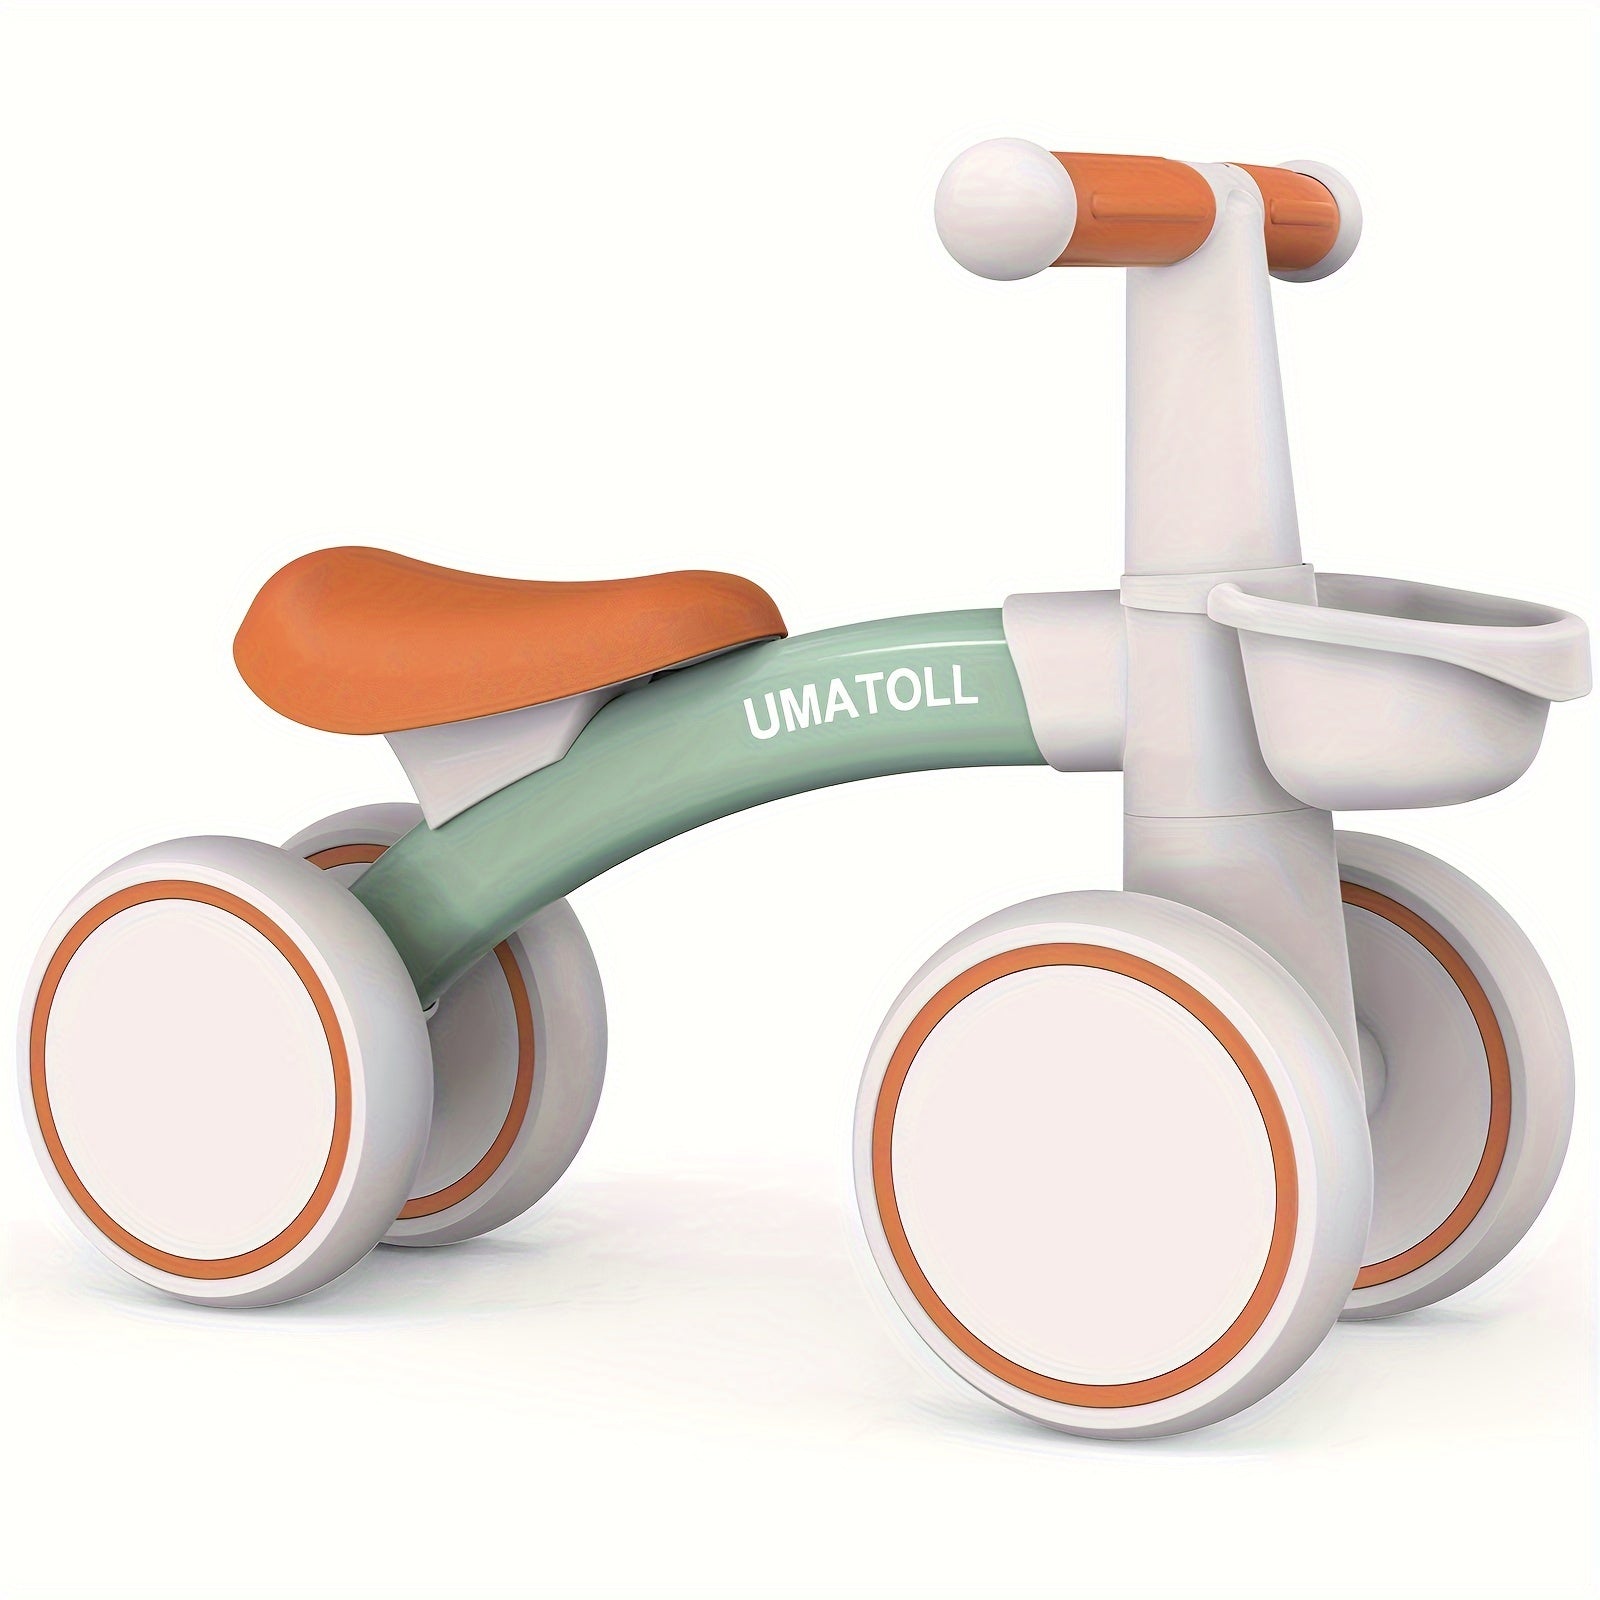 Baby Balance Bike for 1-Year-Olds - Adjustable Seat, No Pedal 4 Wheels